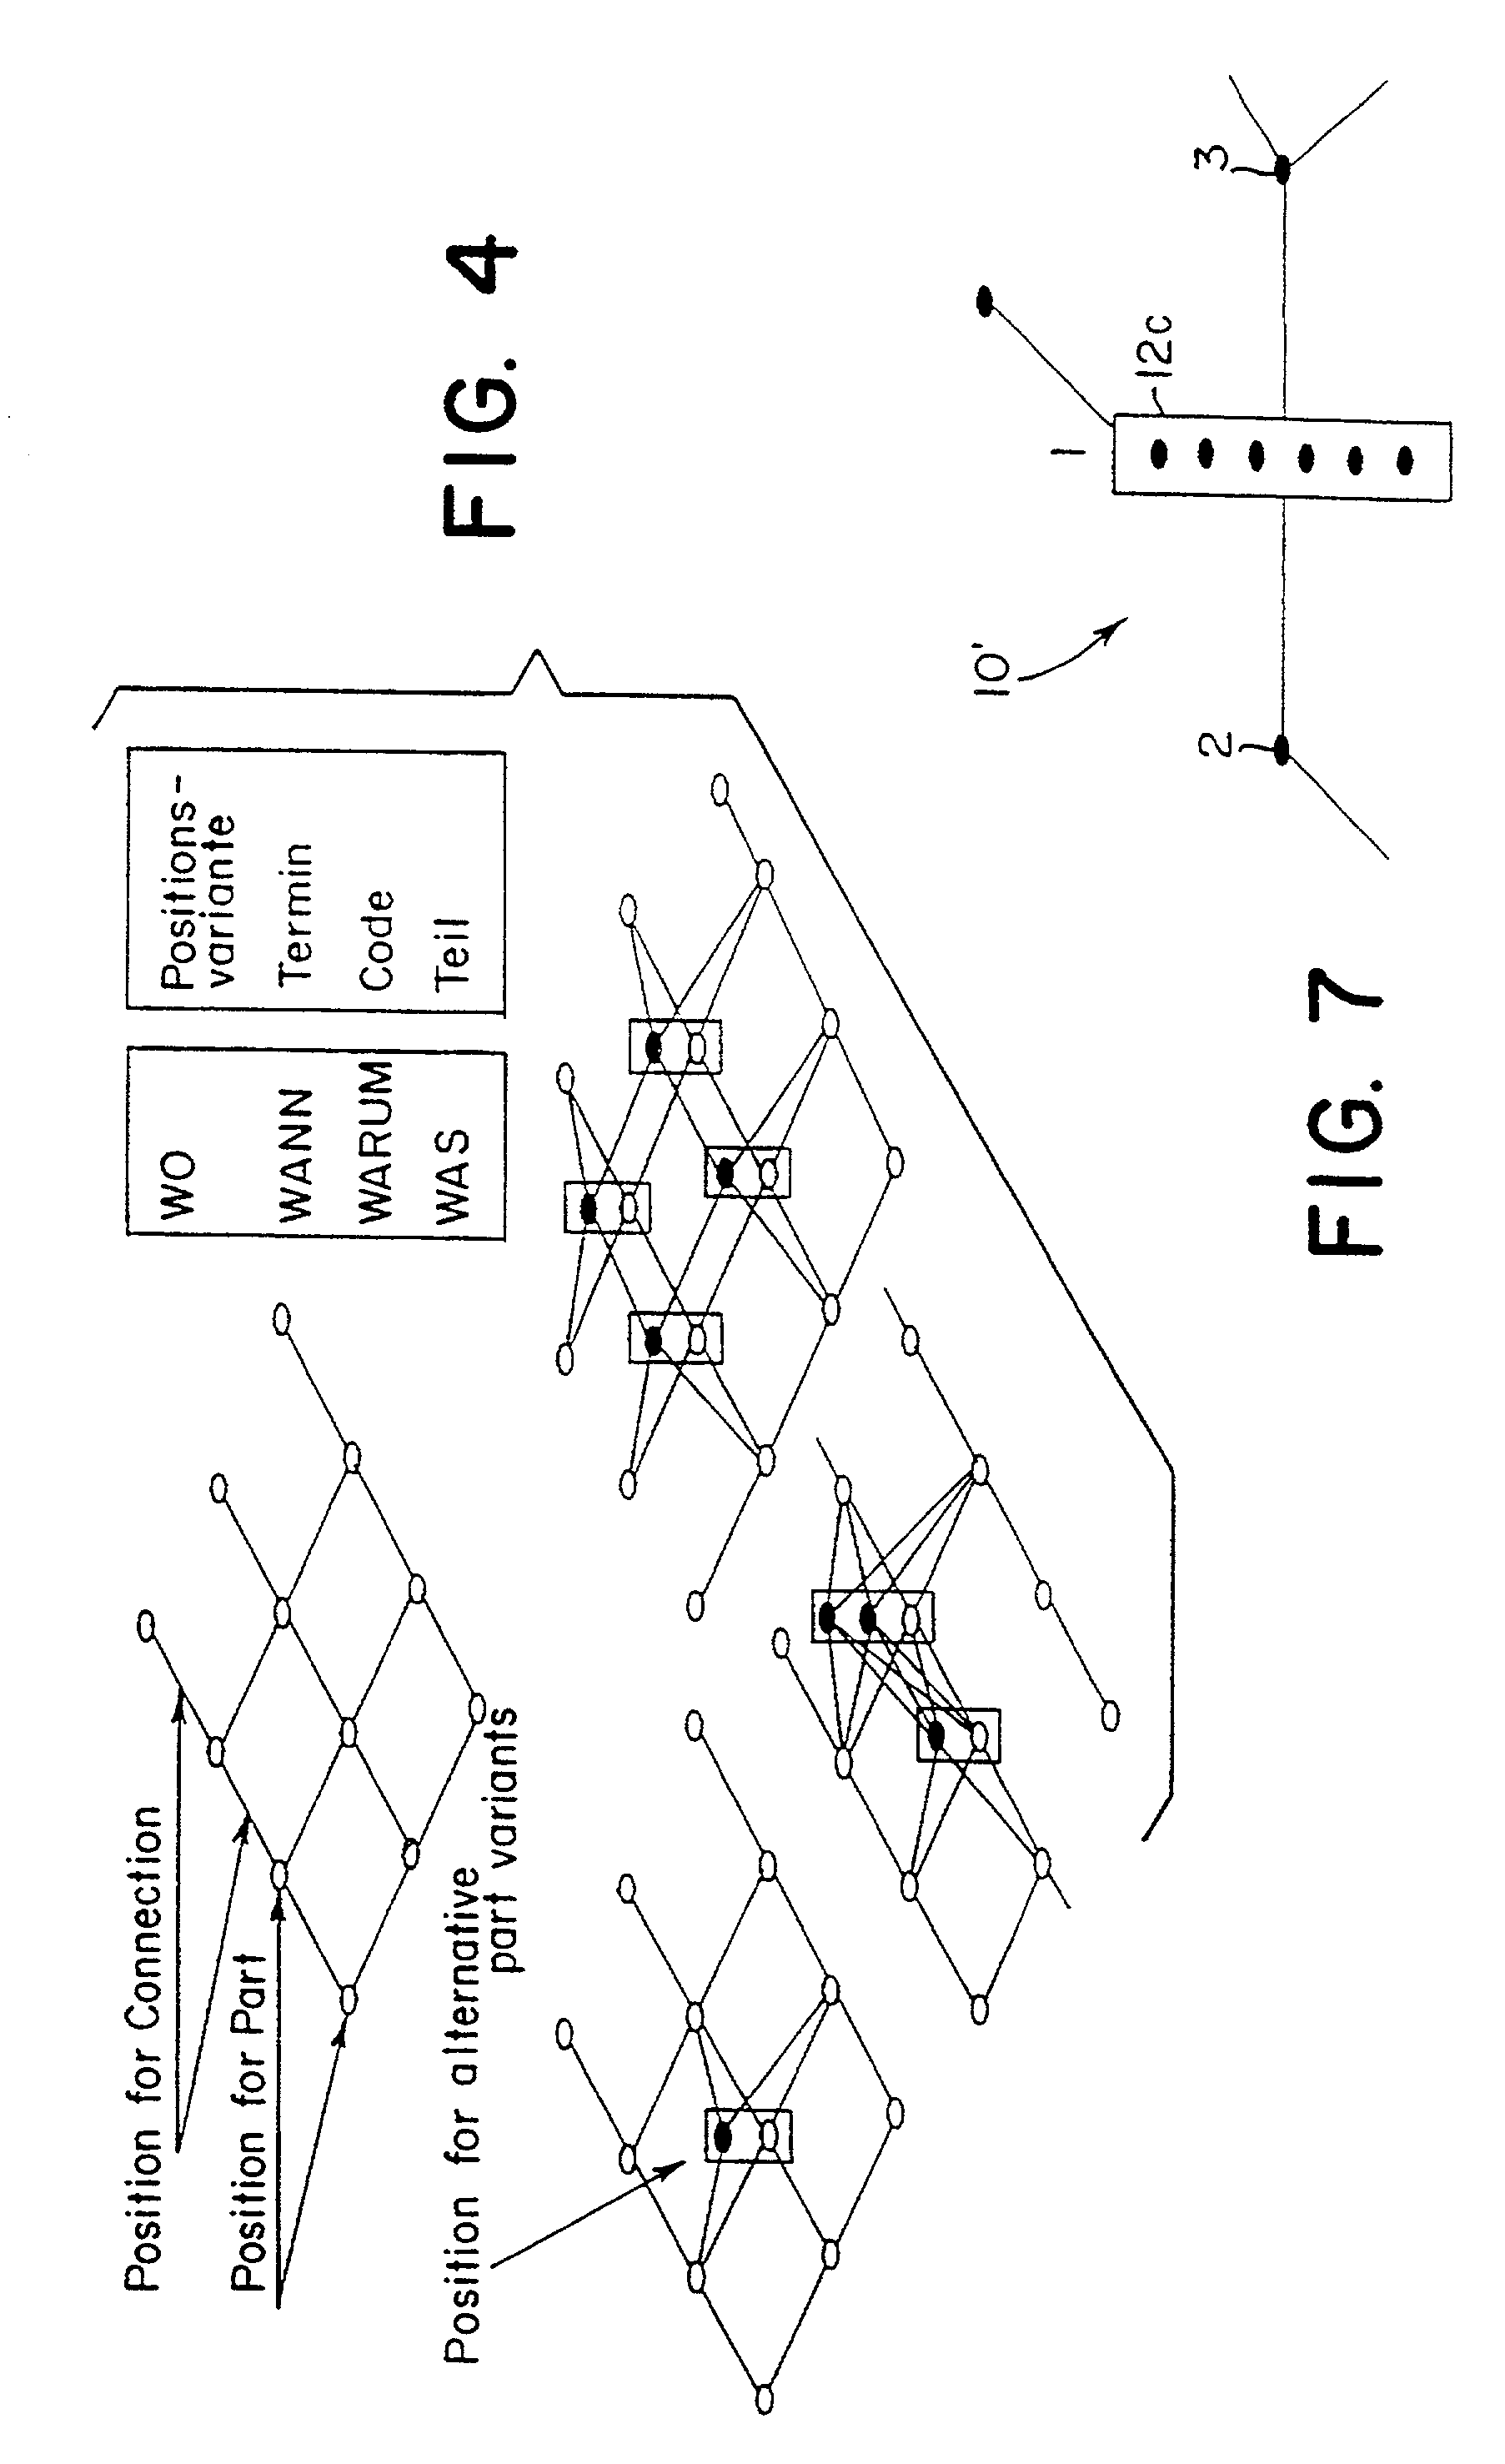 Method and system for resource requirement planning and generating a production schedule using a uniform data model